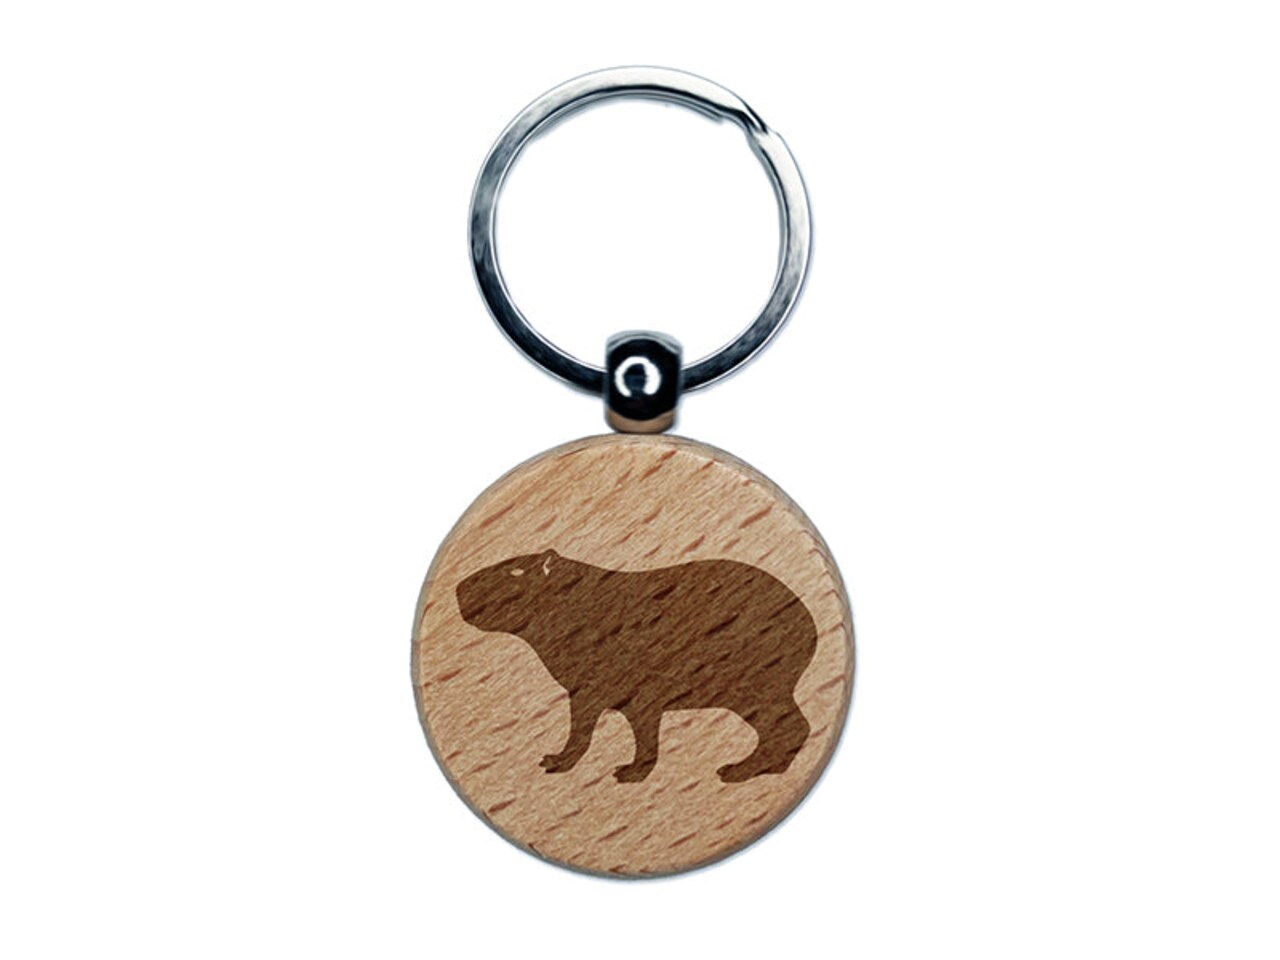 Capybara Standing Silhouette Engraved Wood Round Keychain Tag Charm